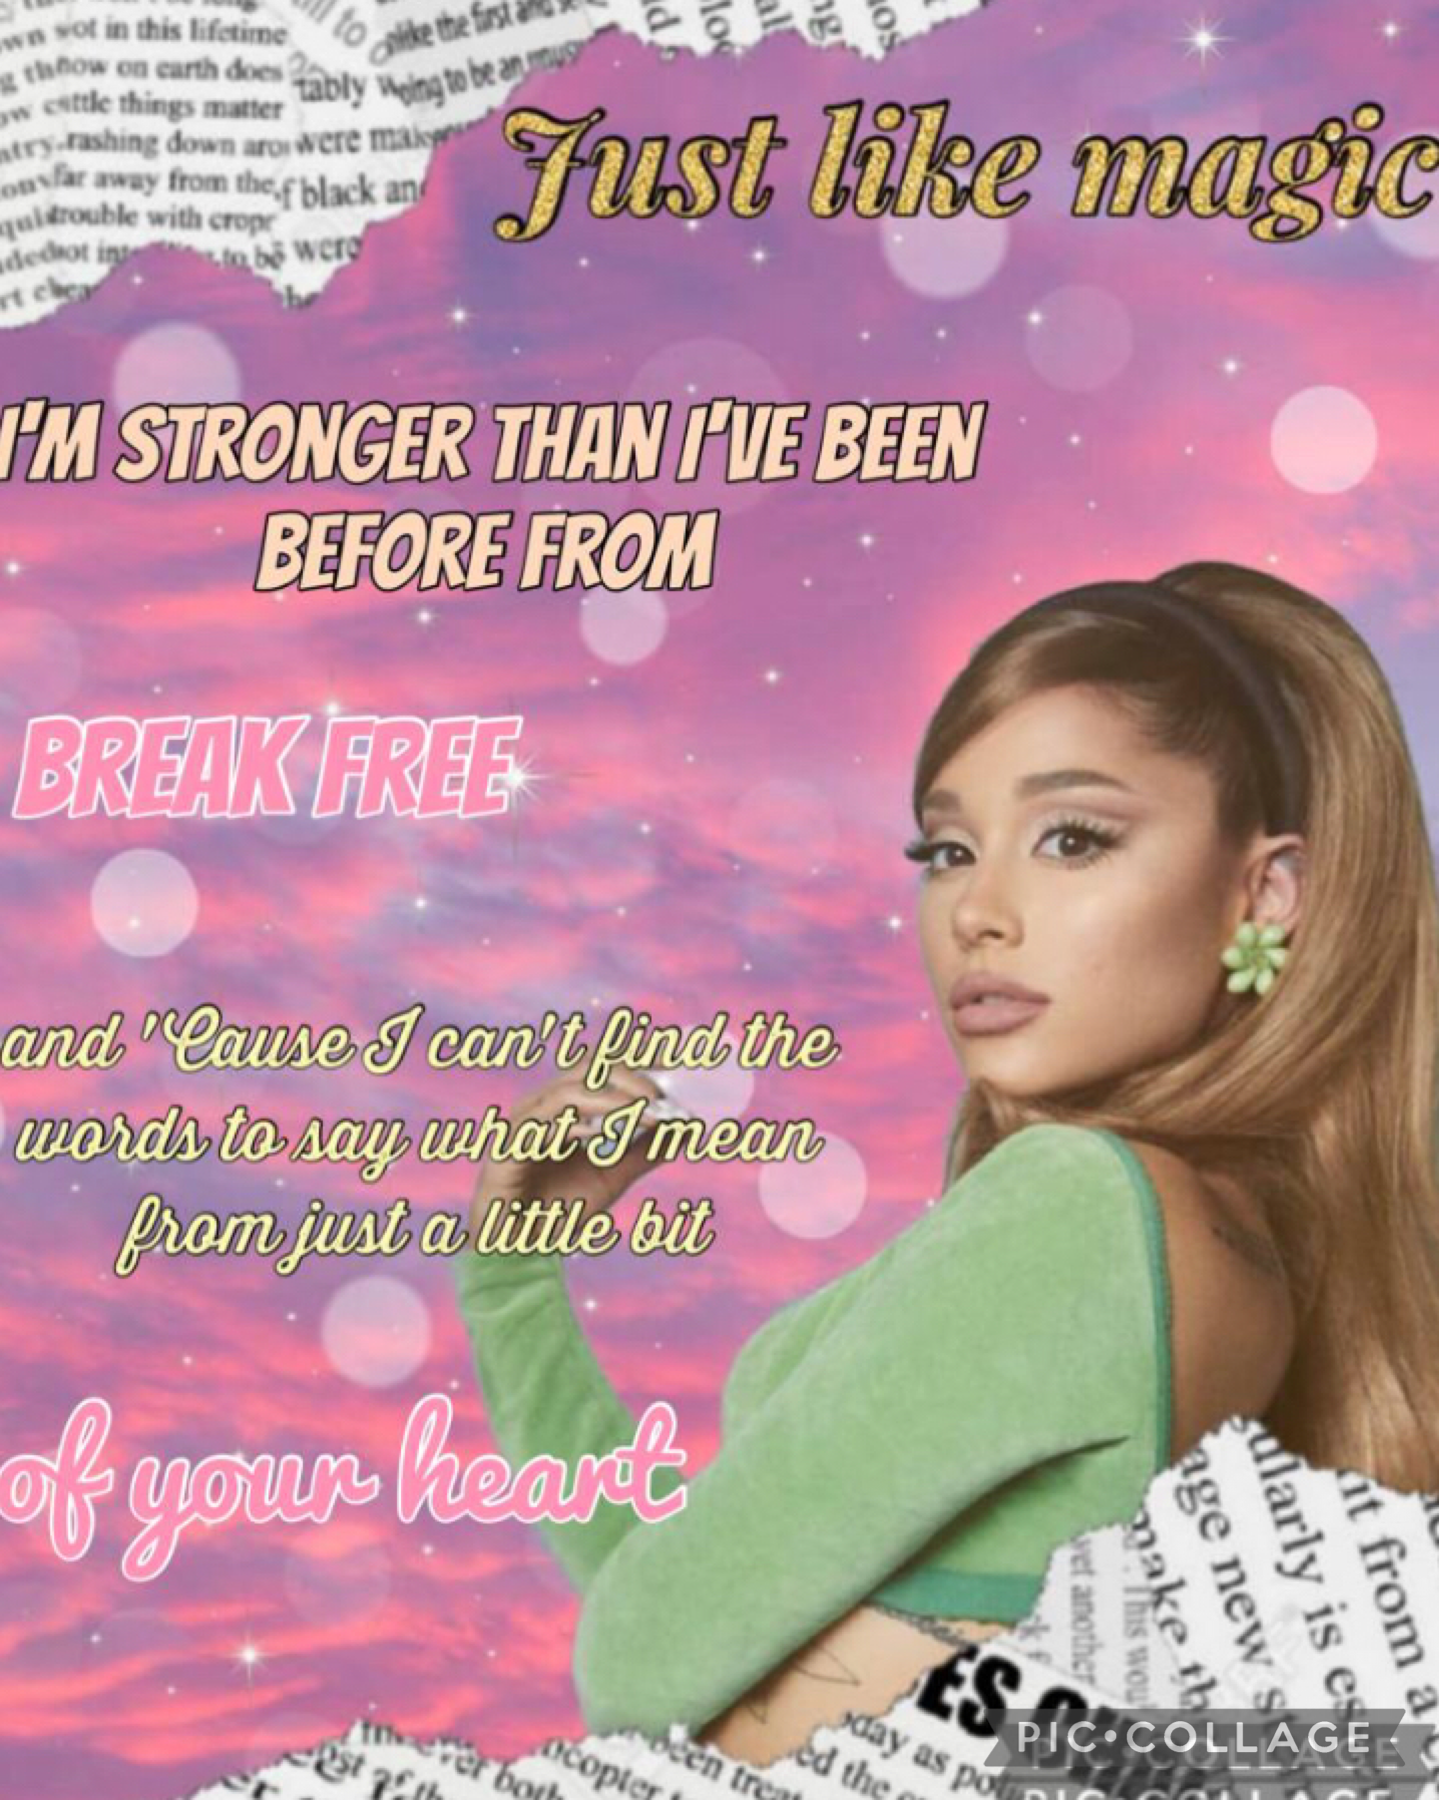 16.9.22 Ariana Grande magazine aesthetic collage collaboration with Wavy-dreams